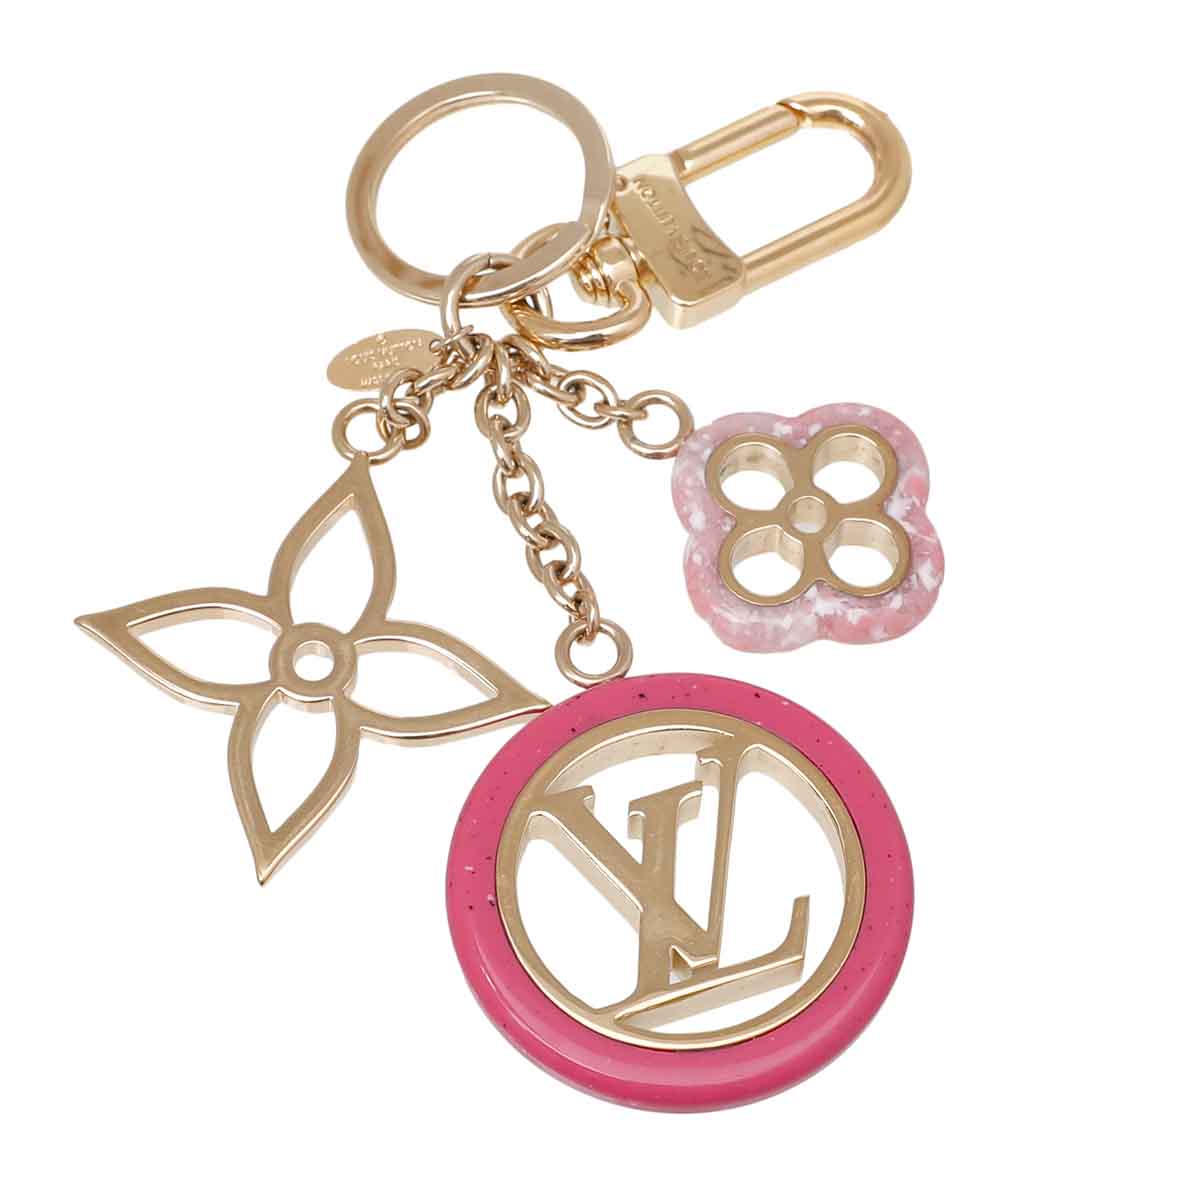 Louis Vuitton Colorline Chain Bag Charm And Key Holder